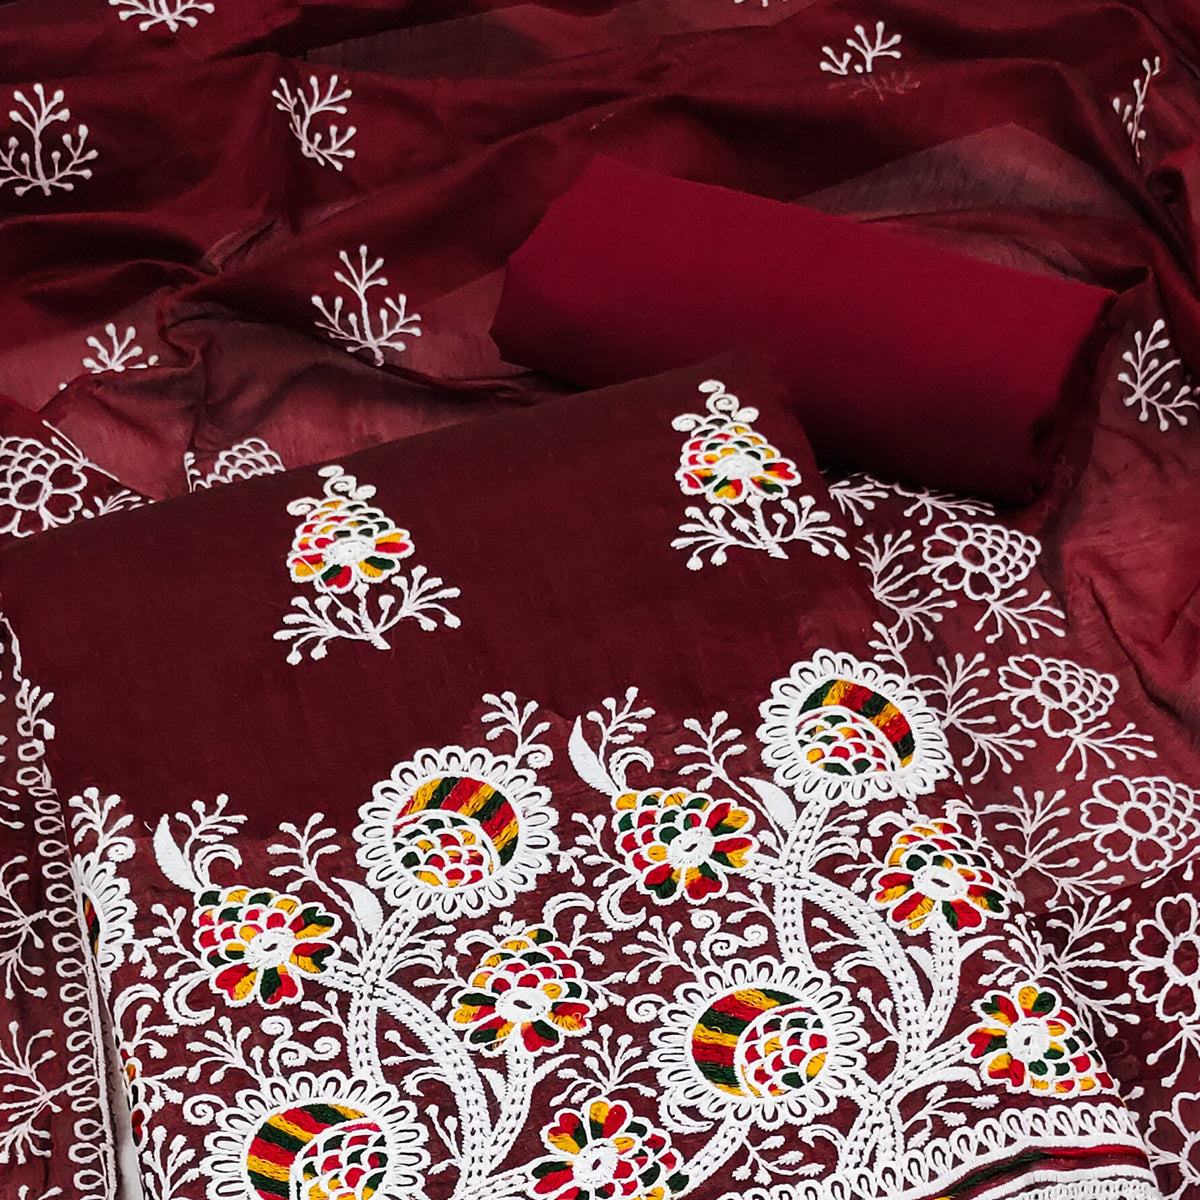 Maroon Floral Embroidered Chanderi Cotton Dress Material